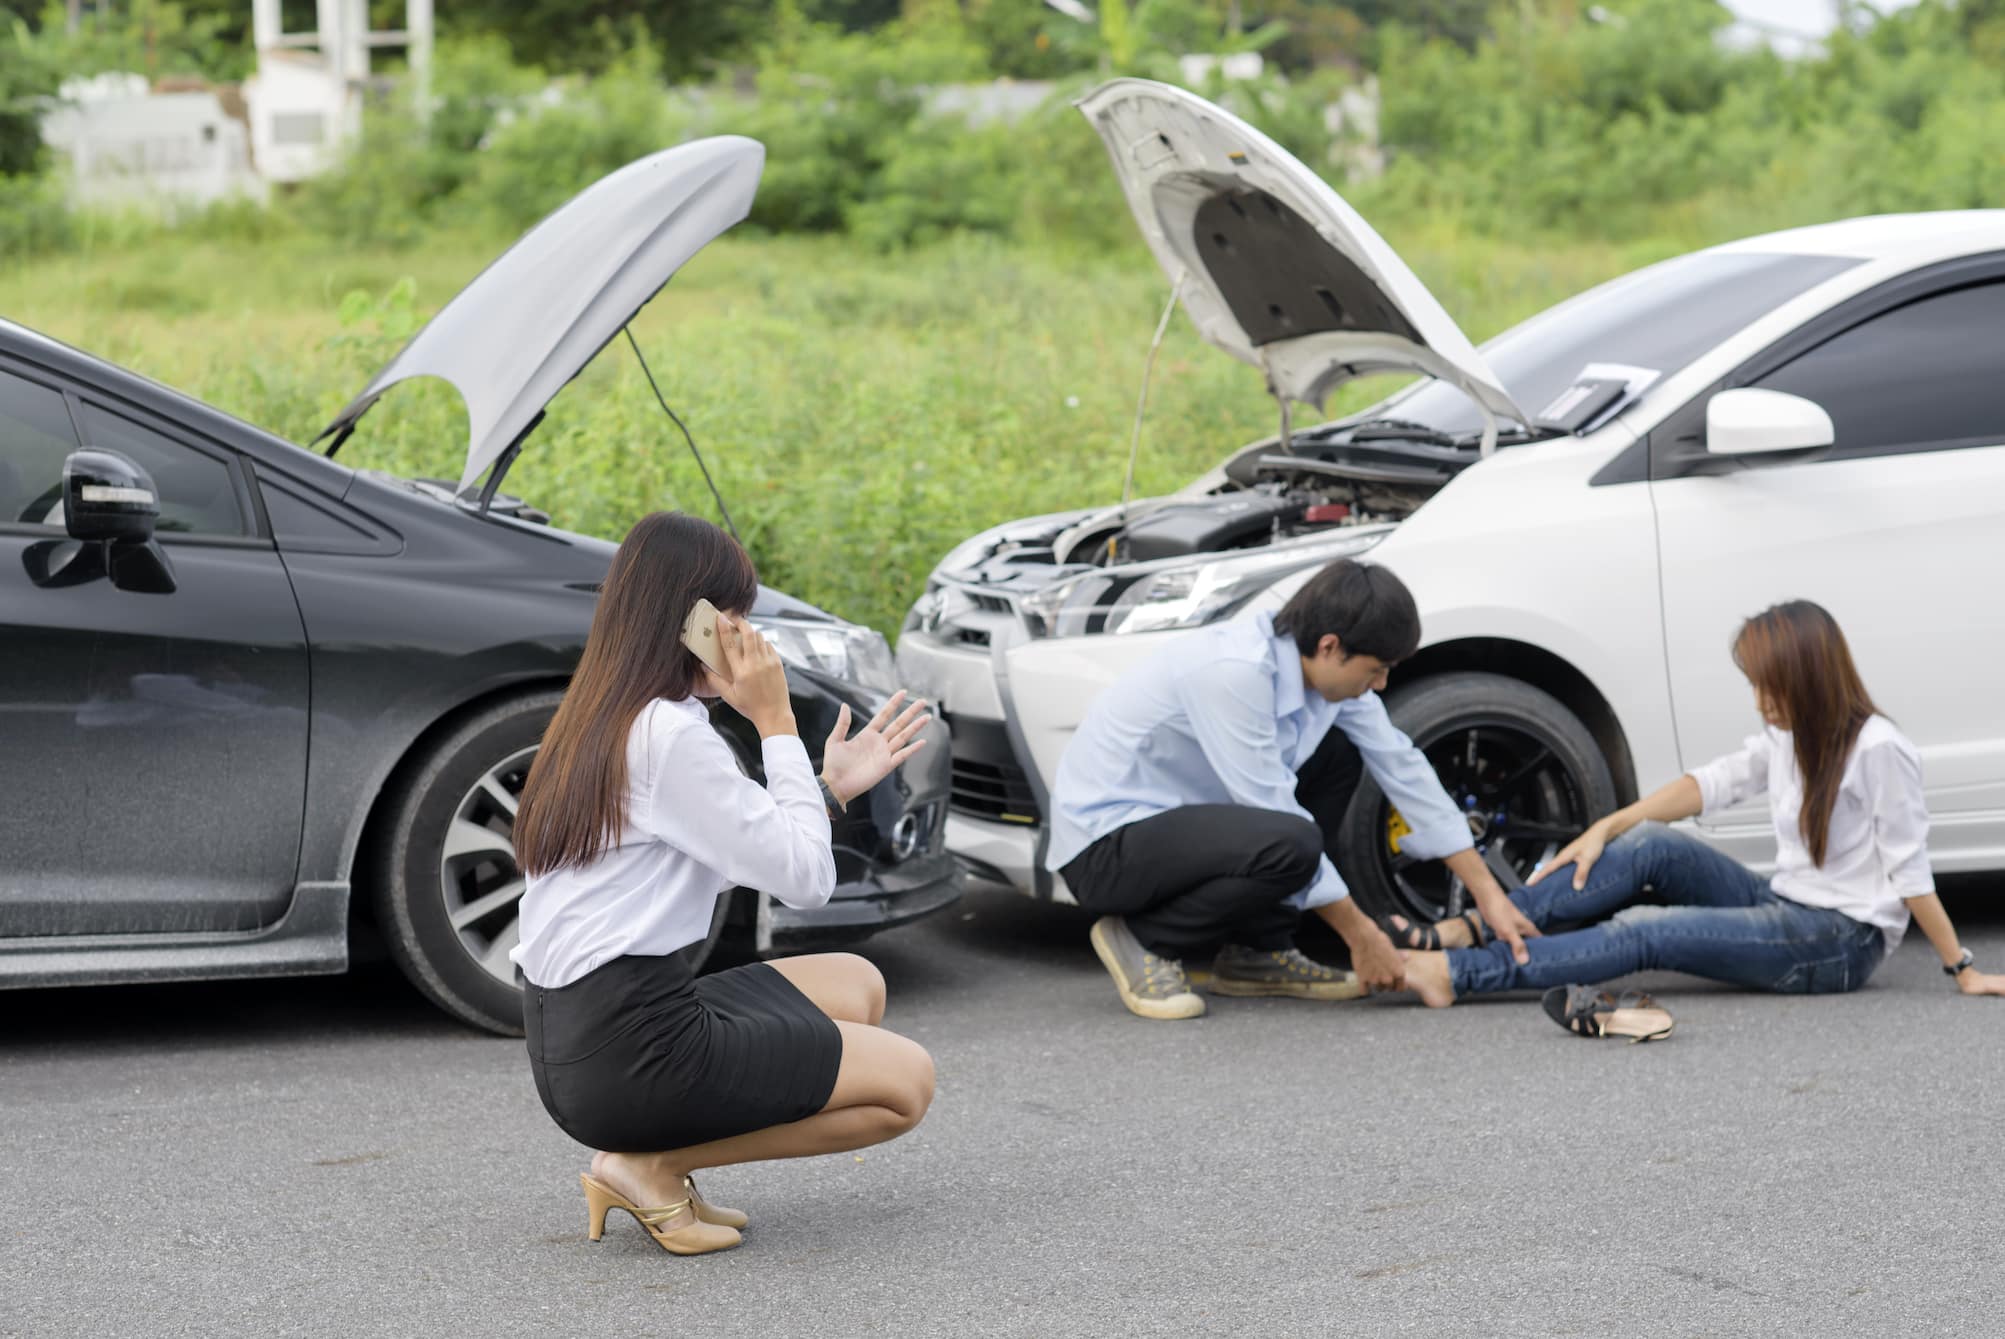 No Fault Offers the Service of The Car Injury Doctor in Forest Hills Without Prior Appointments